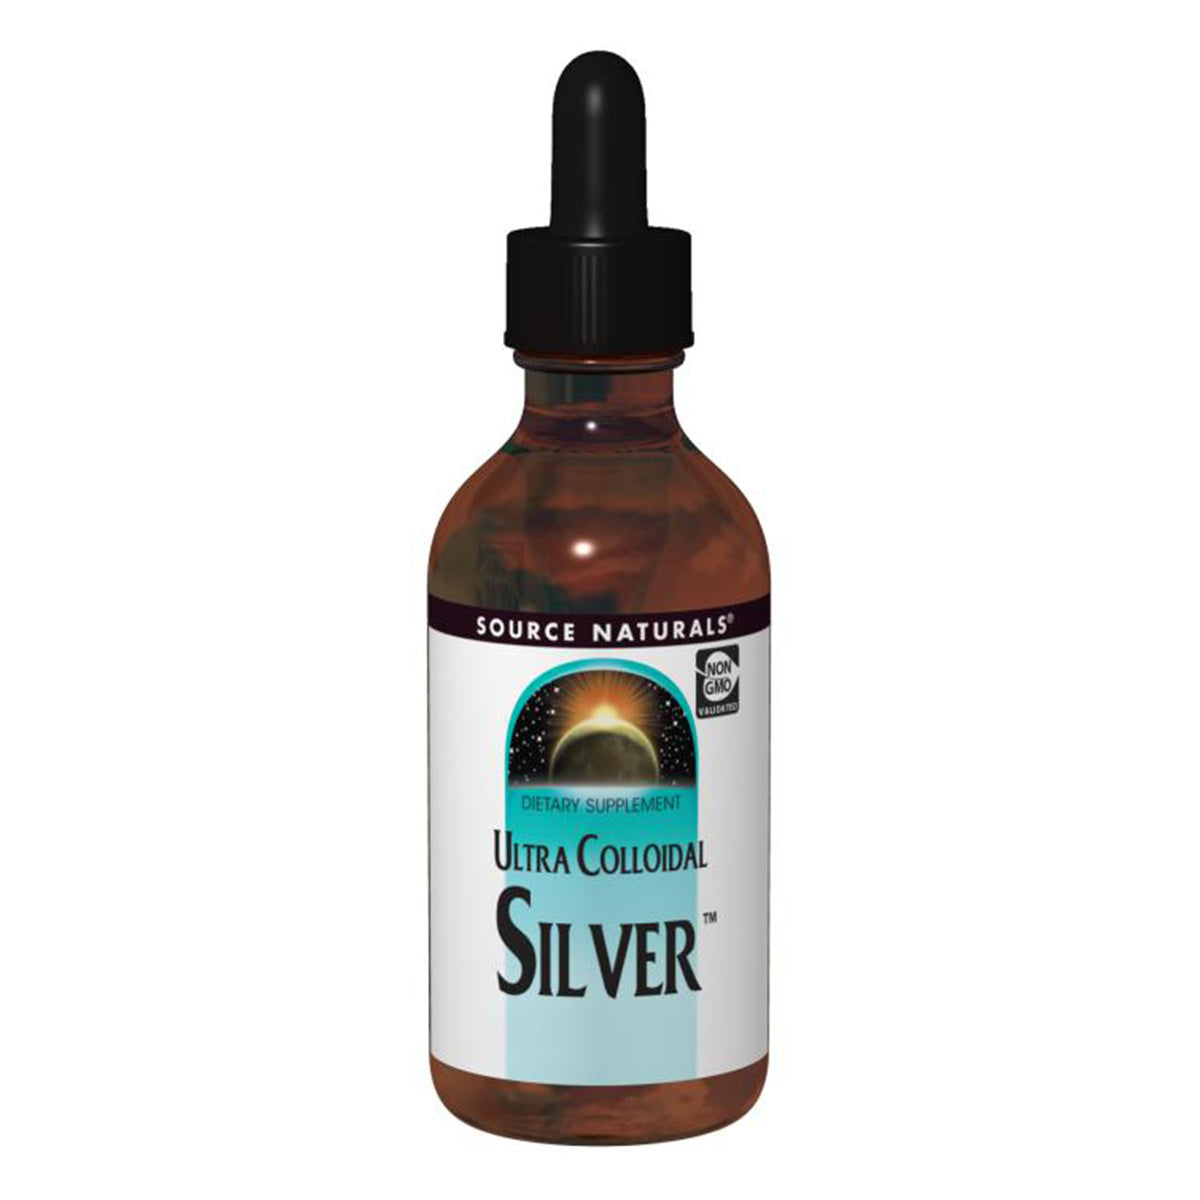 Primary image of Ultra Colloidal Silver 10ppm